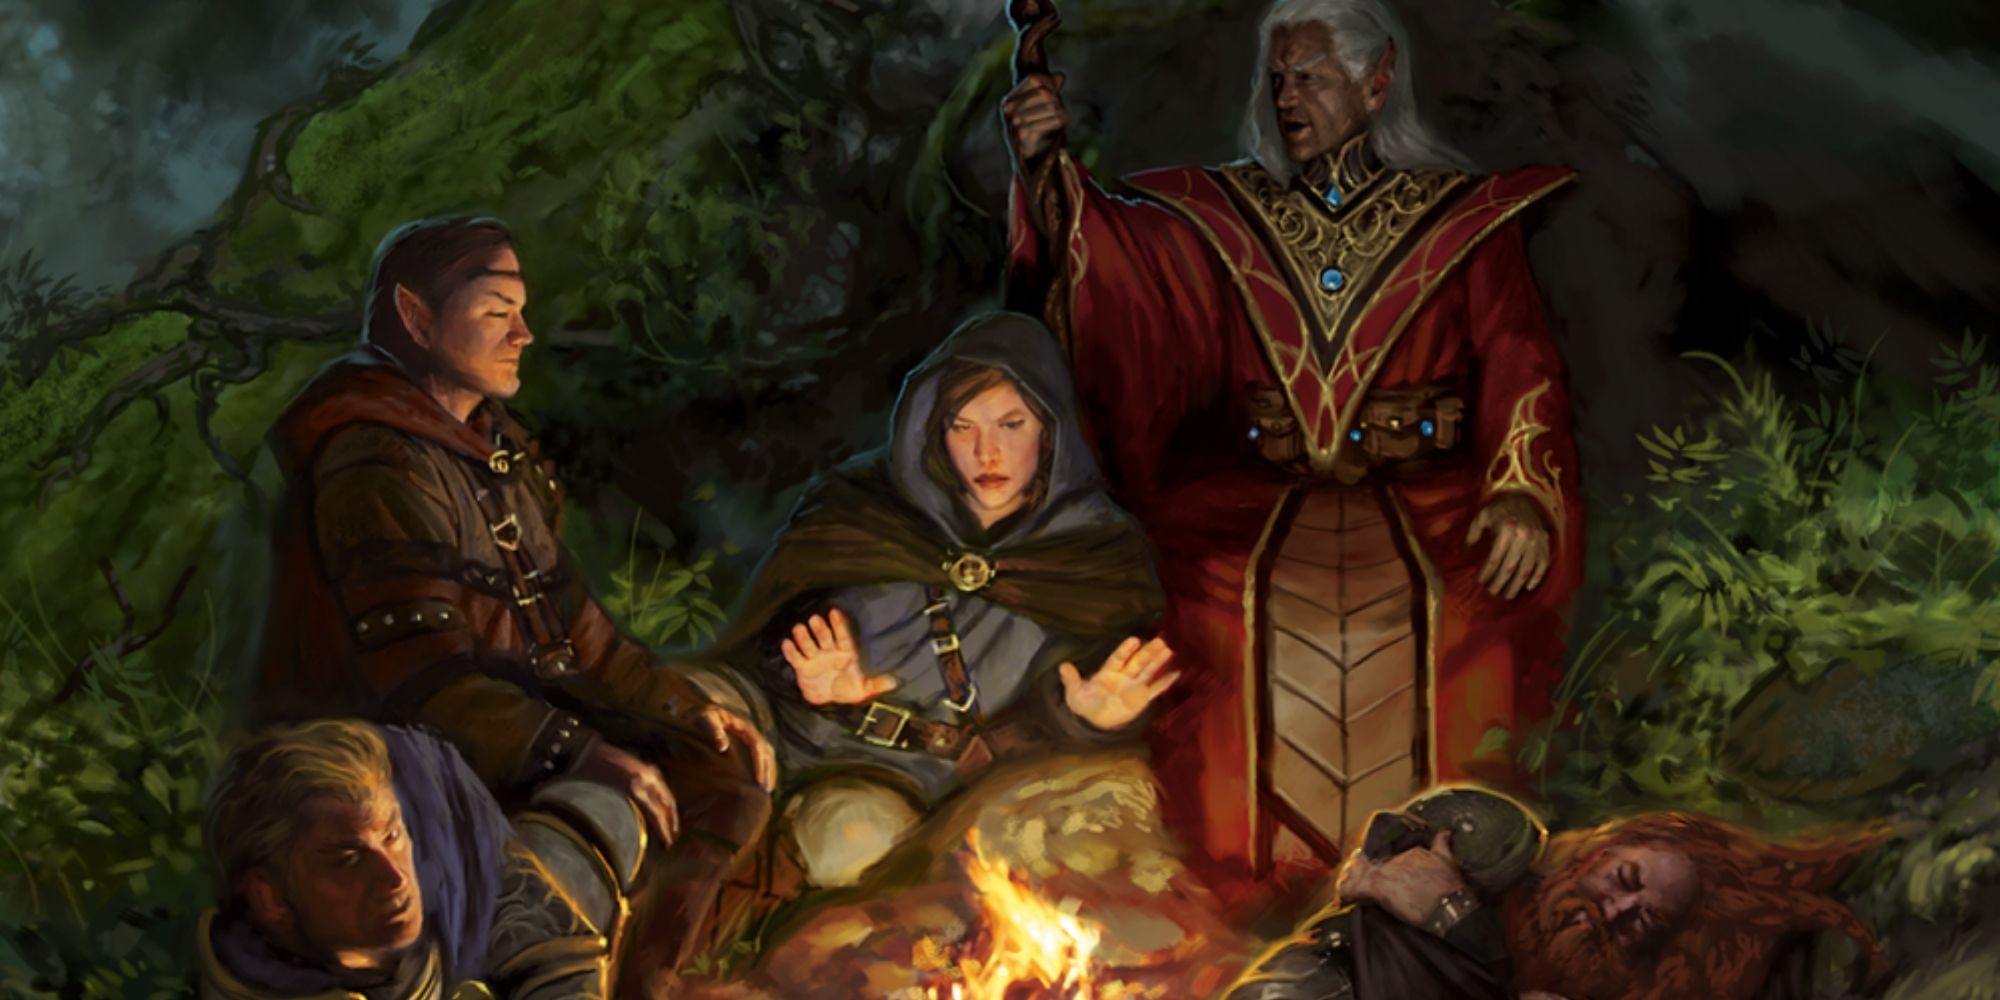 D&D characters surrounding a campfire.